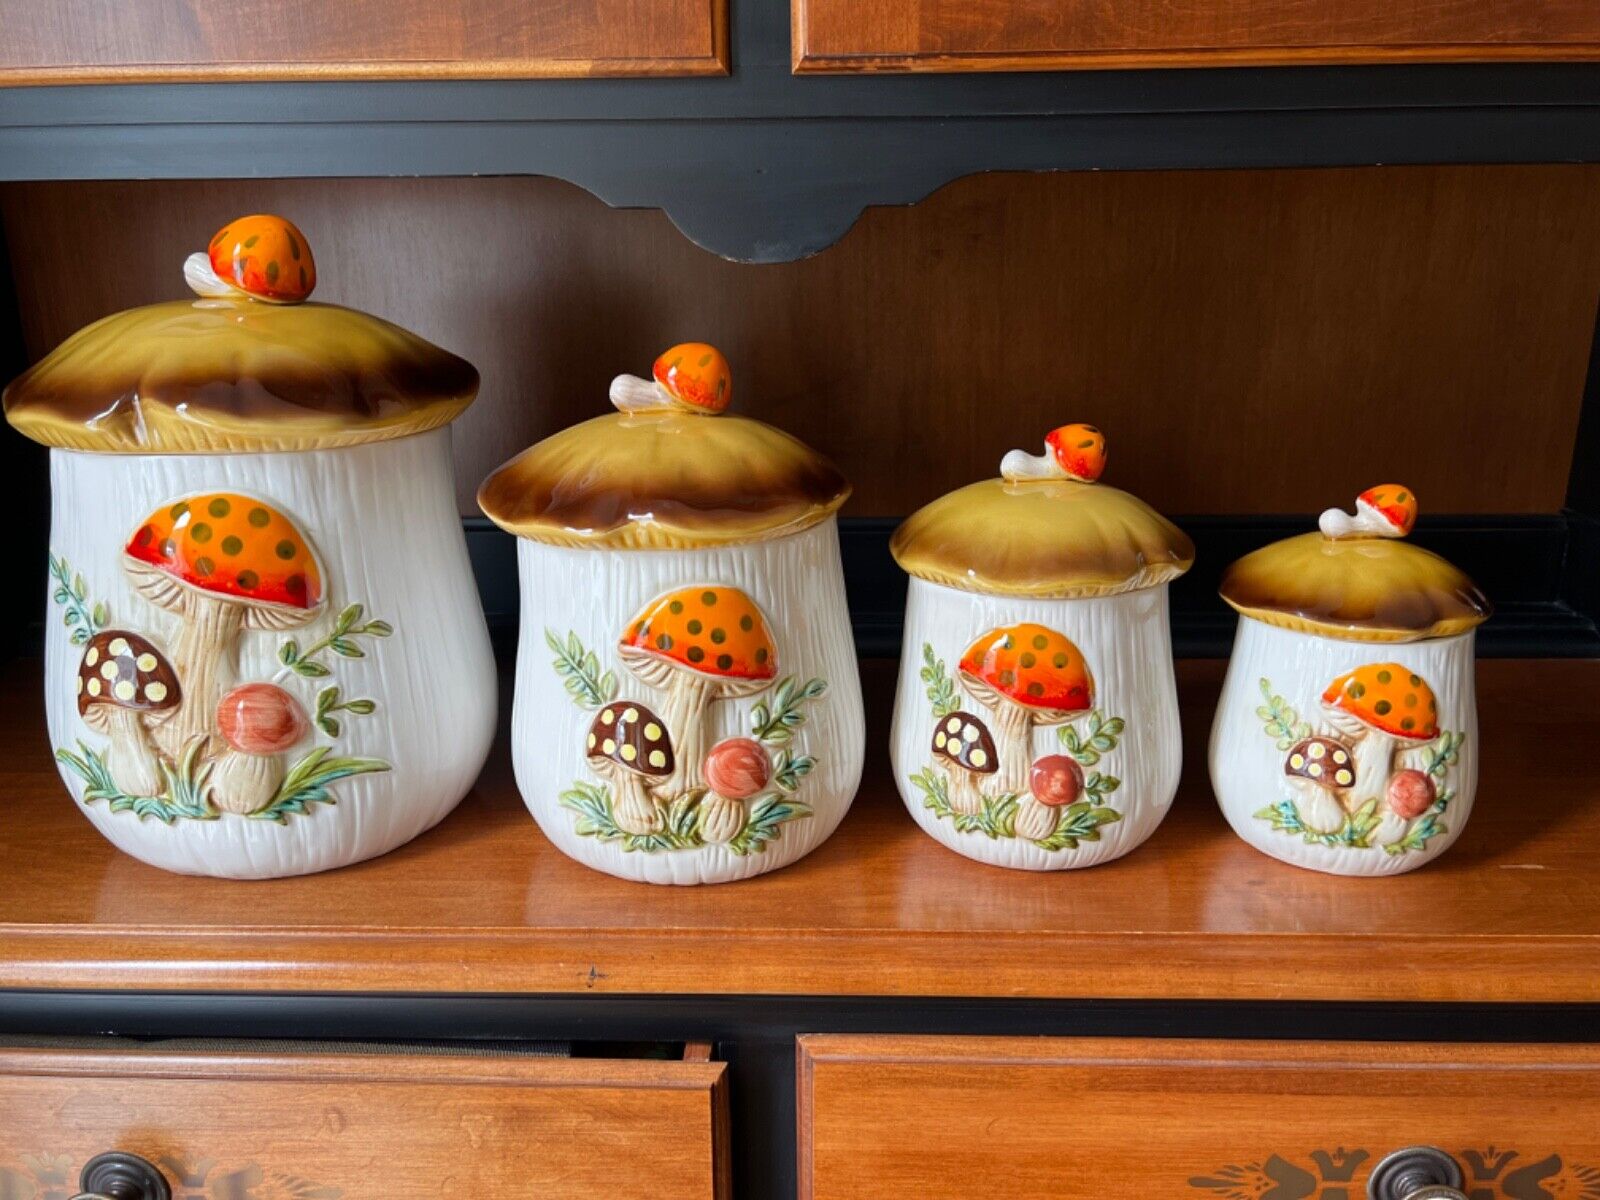 Merry Mushroom 4 Piece Canister Set With Lids Sears Roebuck & Co Japan 1978